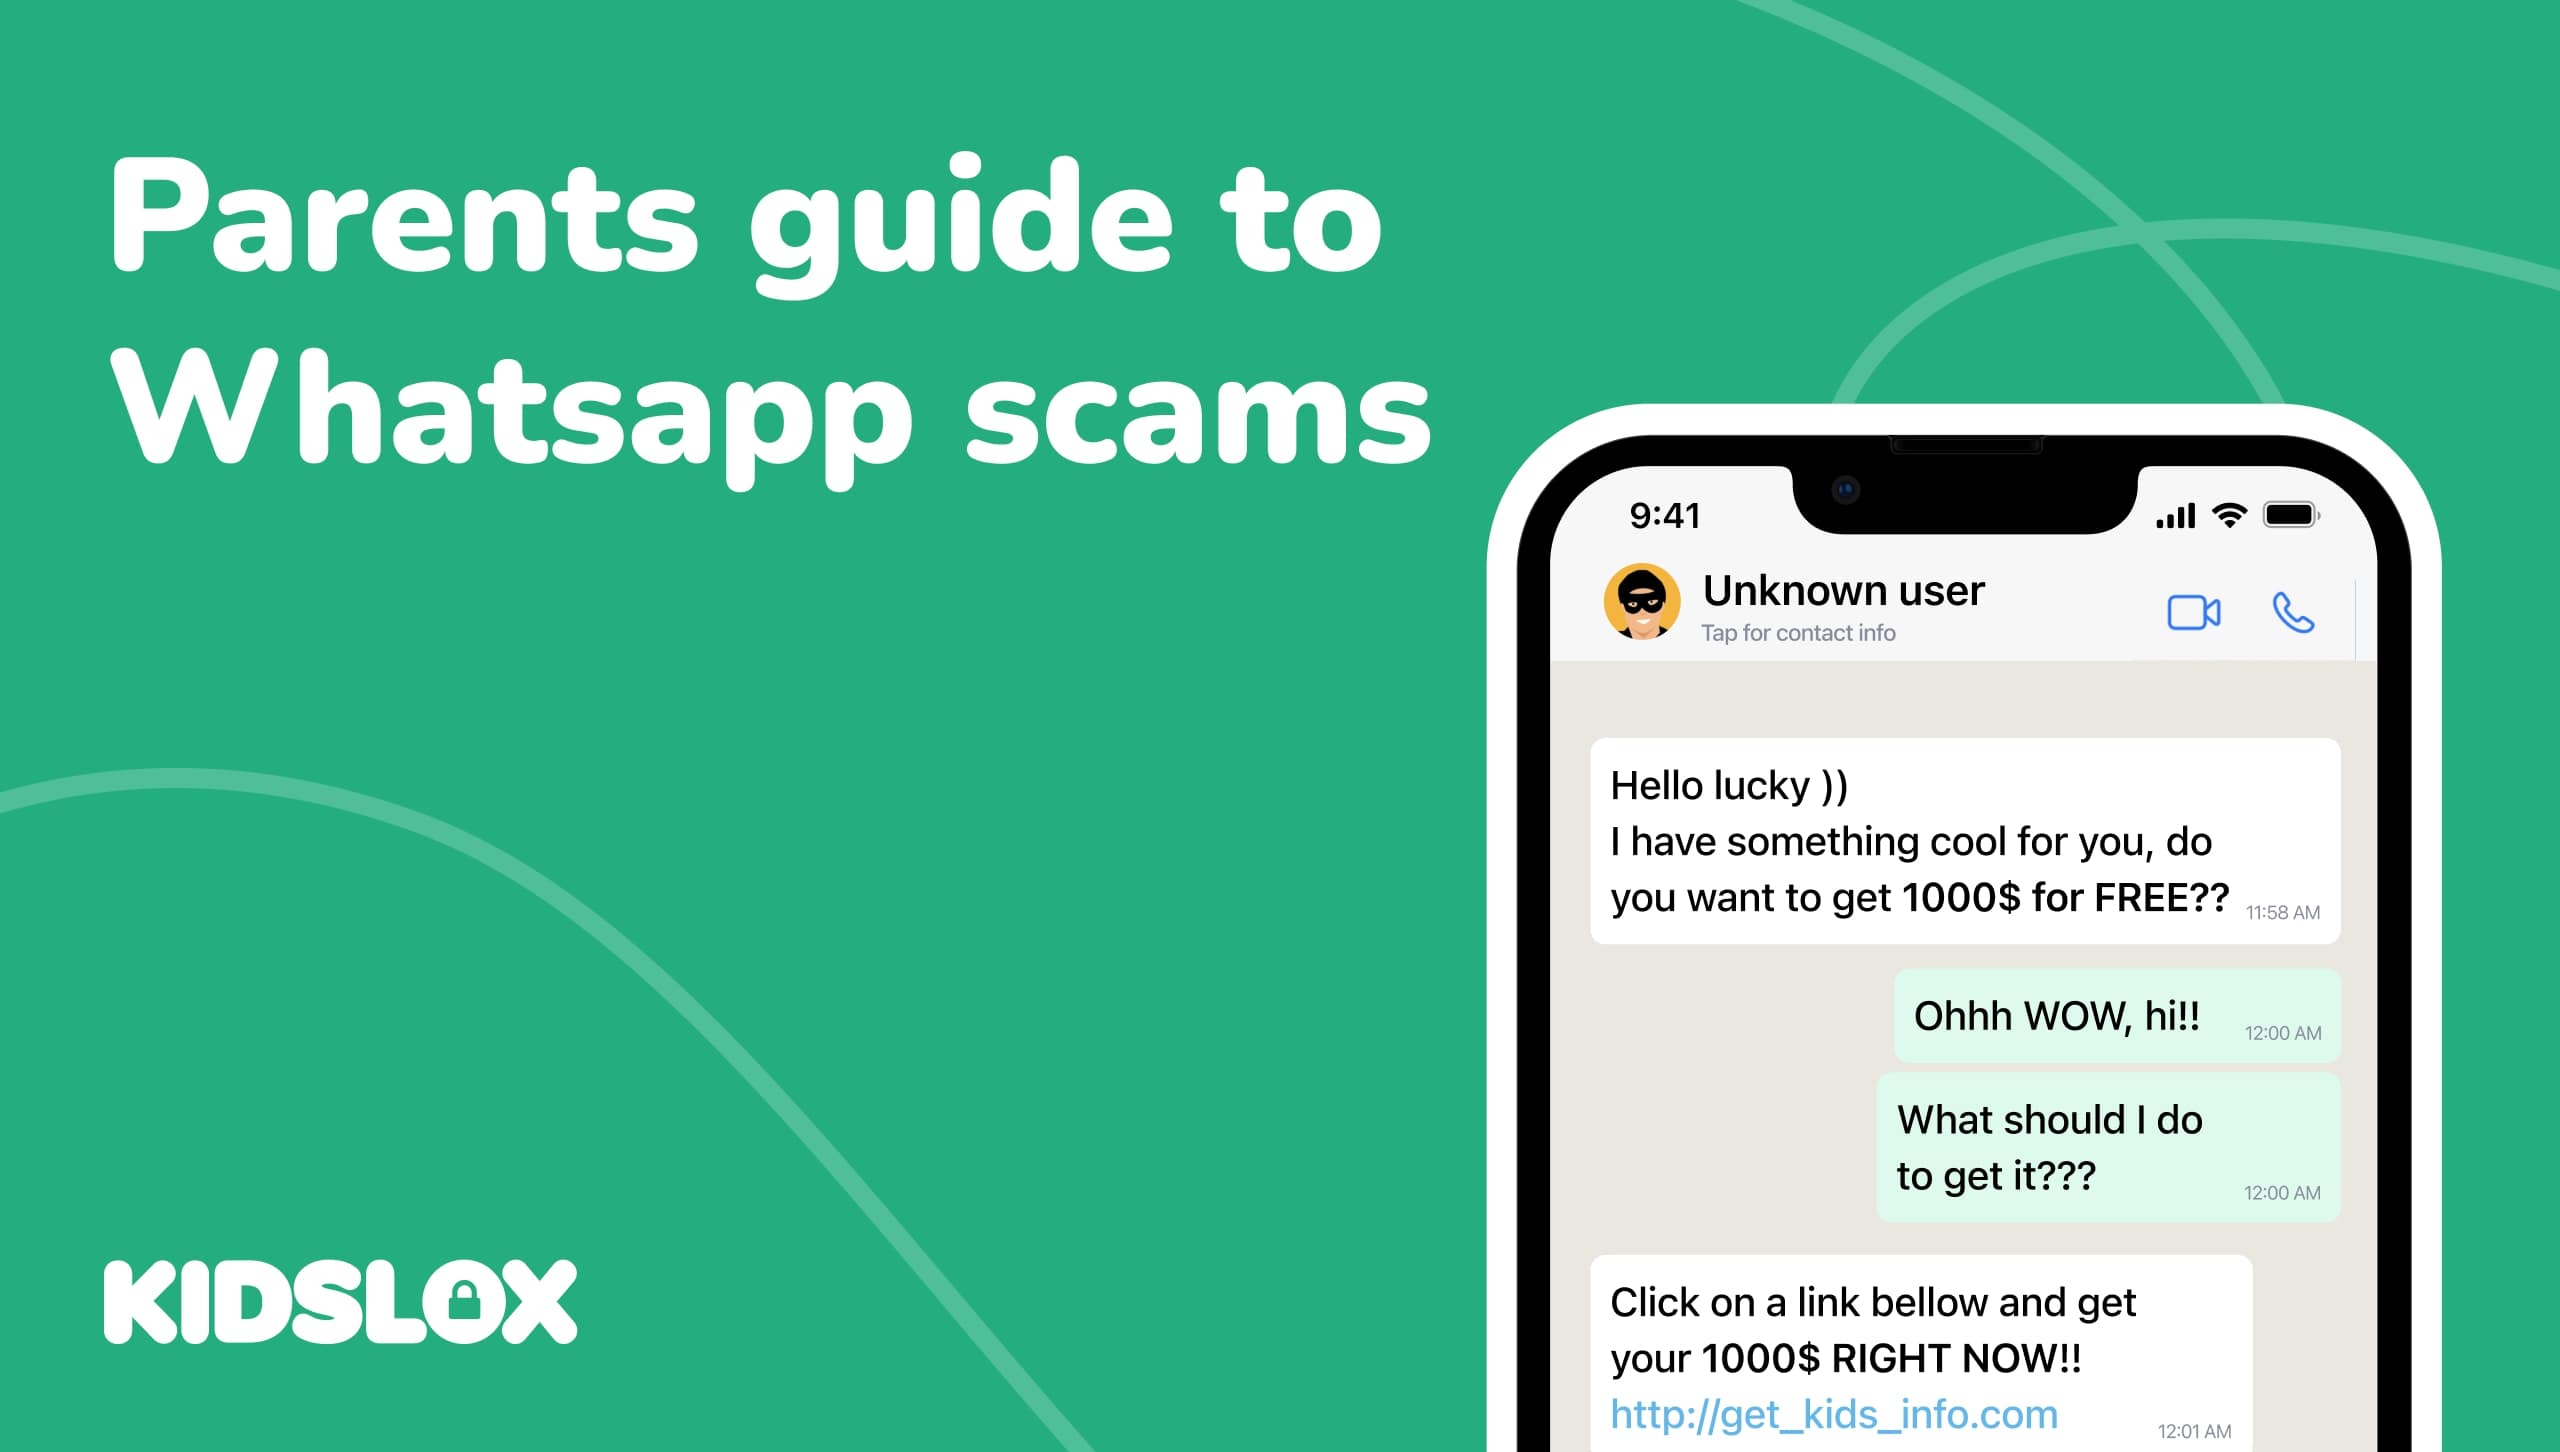 Whatsapp scams How to identify & avoid them Kidslox